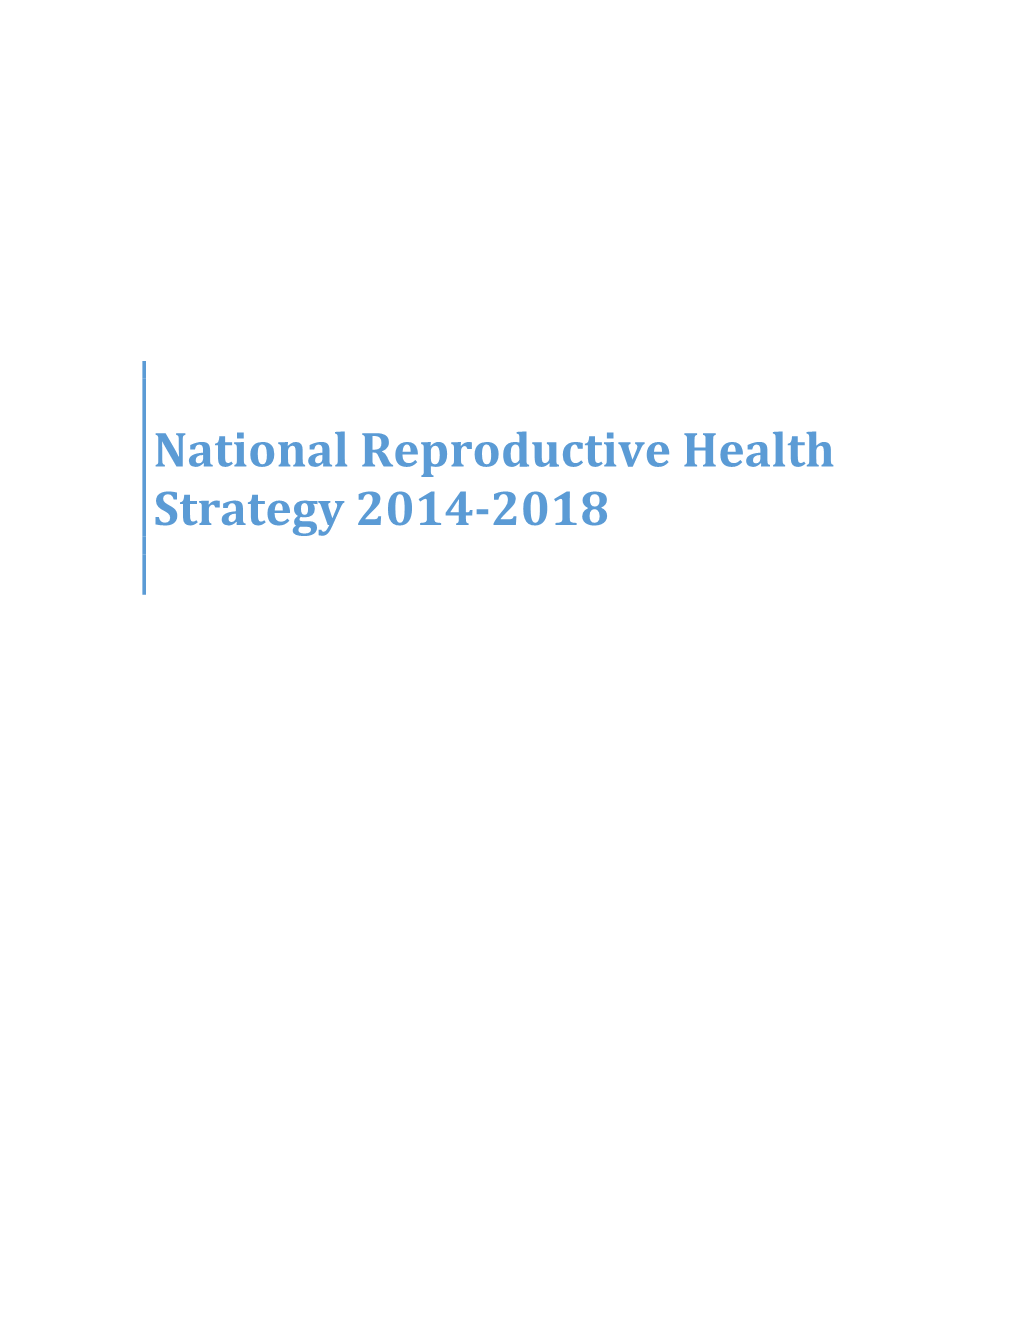 Government, National Reproductive Health Strategy 2014-2018Pdf